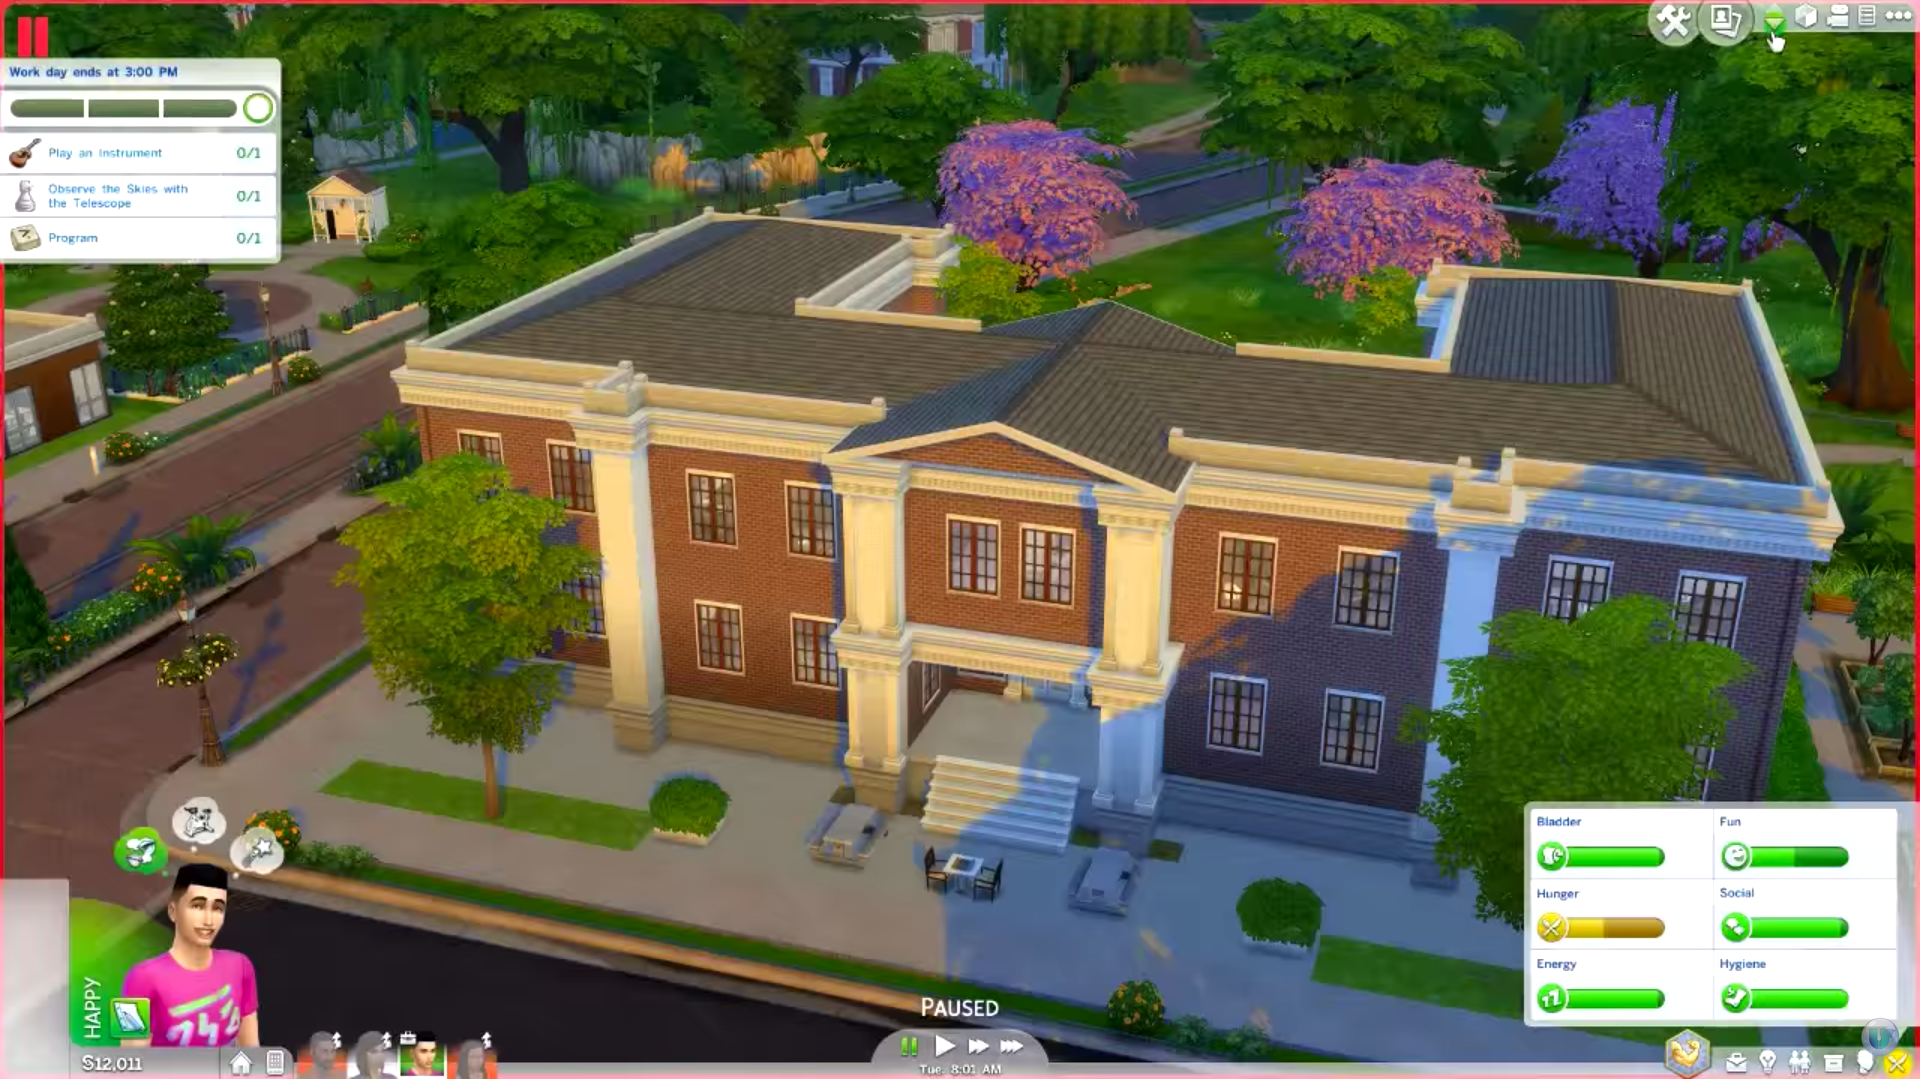 the sims 4 university download